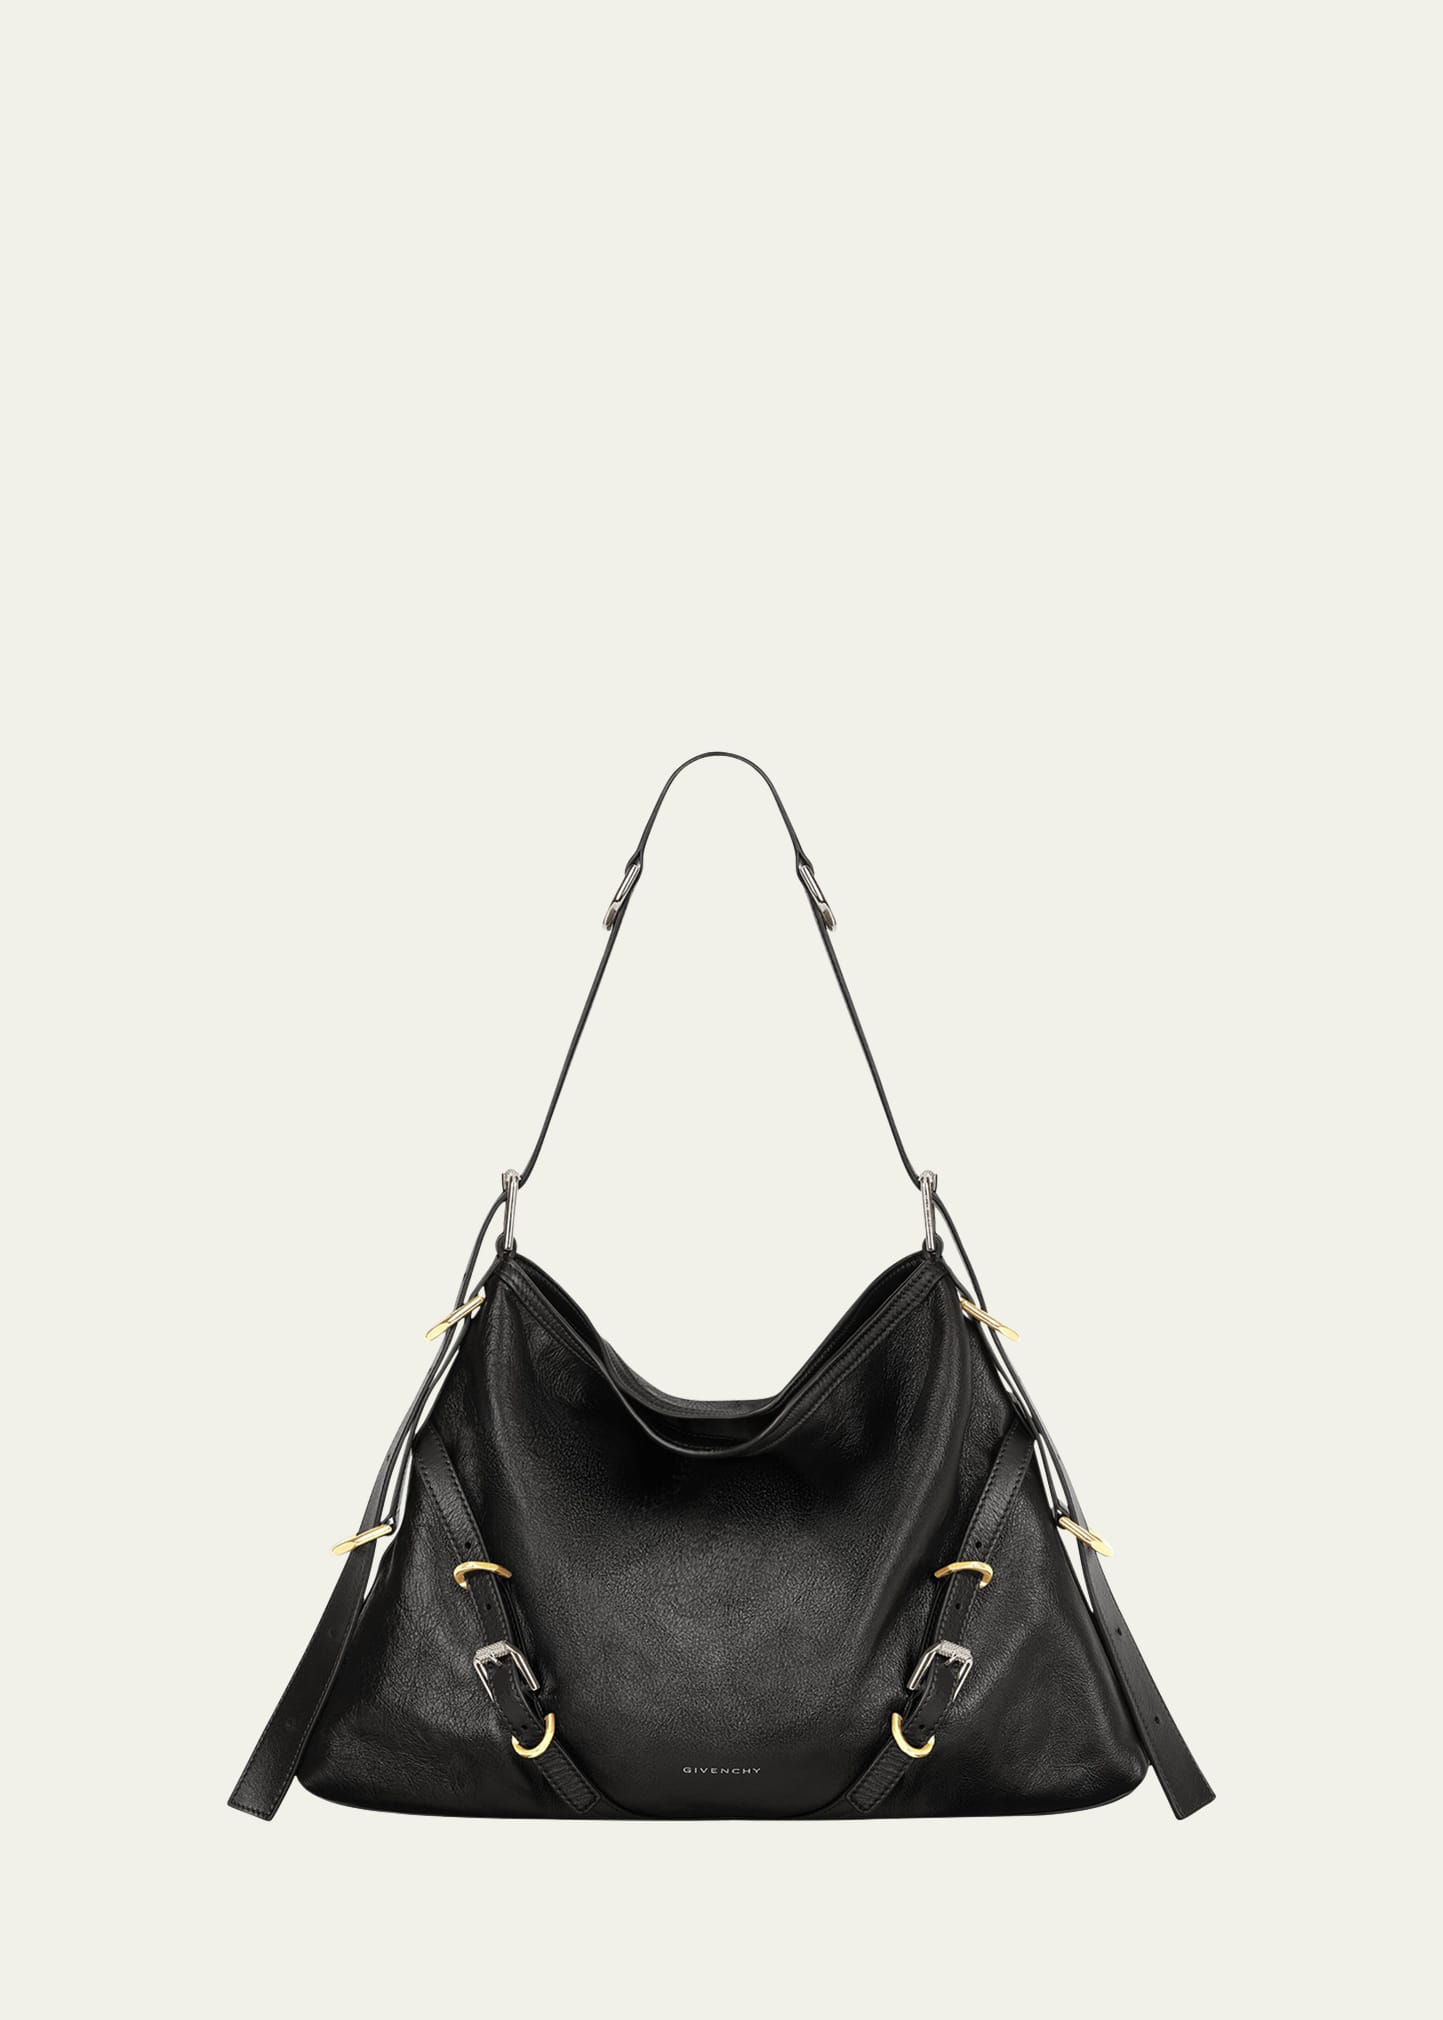 Givenchy Medium Voyou Buckle Shoulder Bag In Tumbled Leather In Black